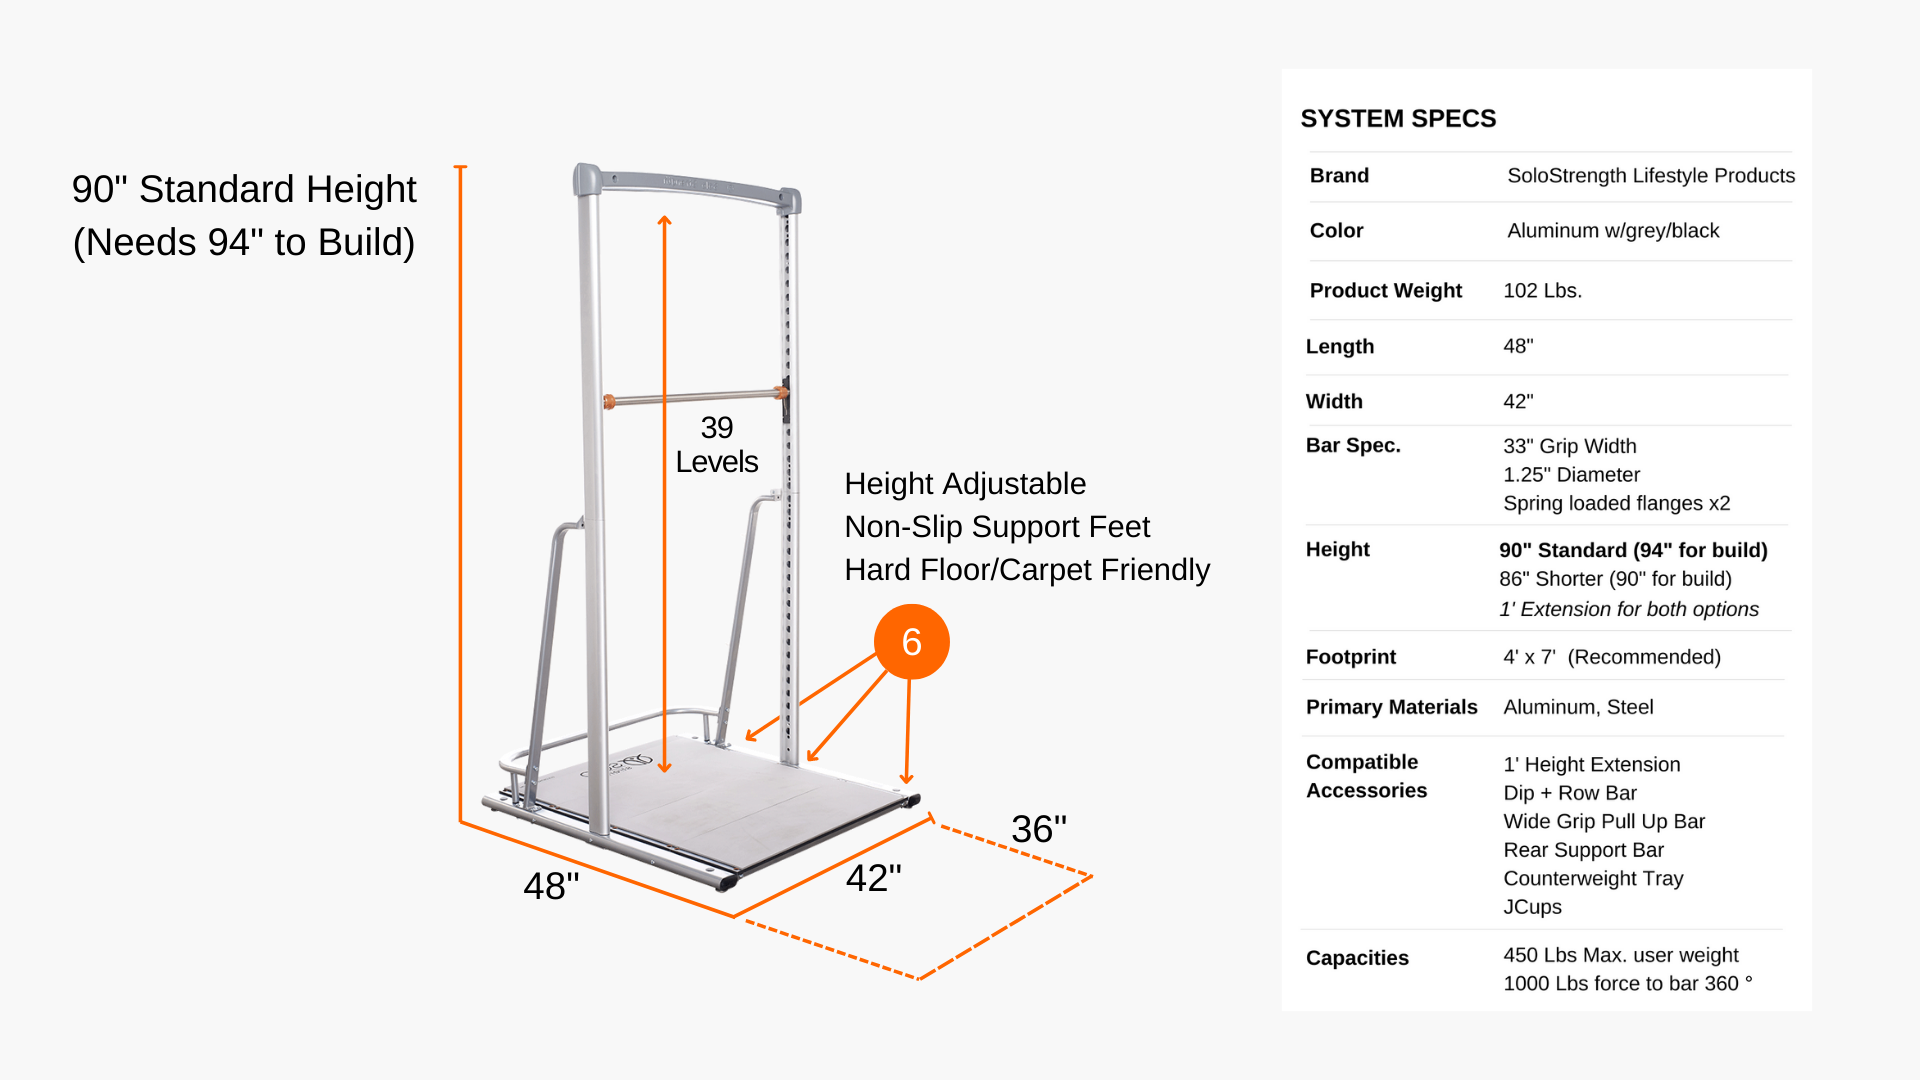 Desktop Specifications for freestanding adjustable height pull up bar bodyweight training equipment and dip station by solo strength